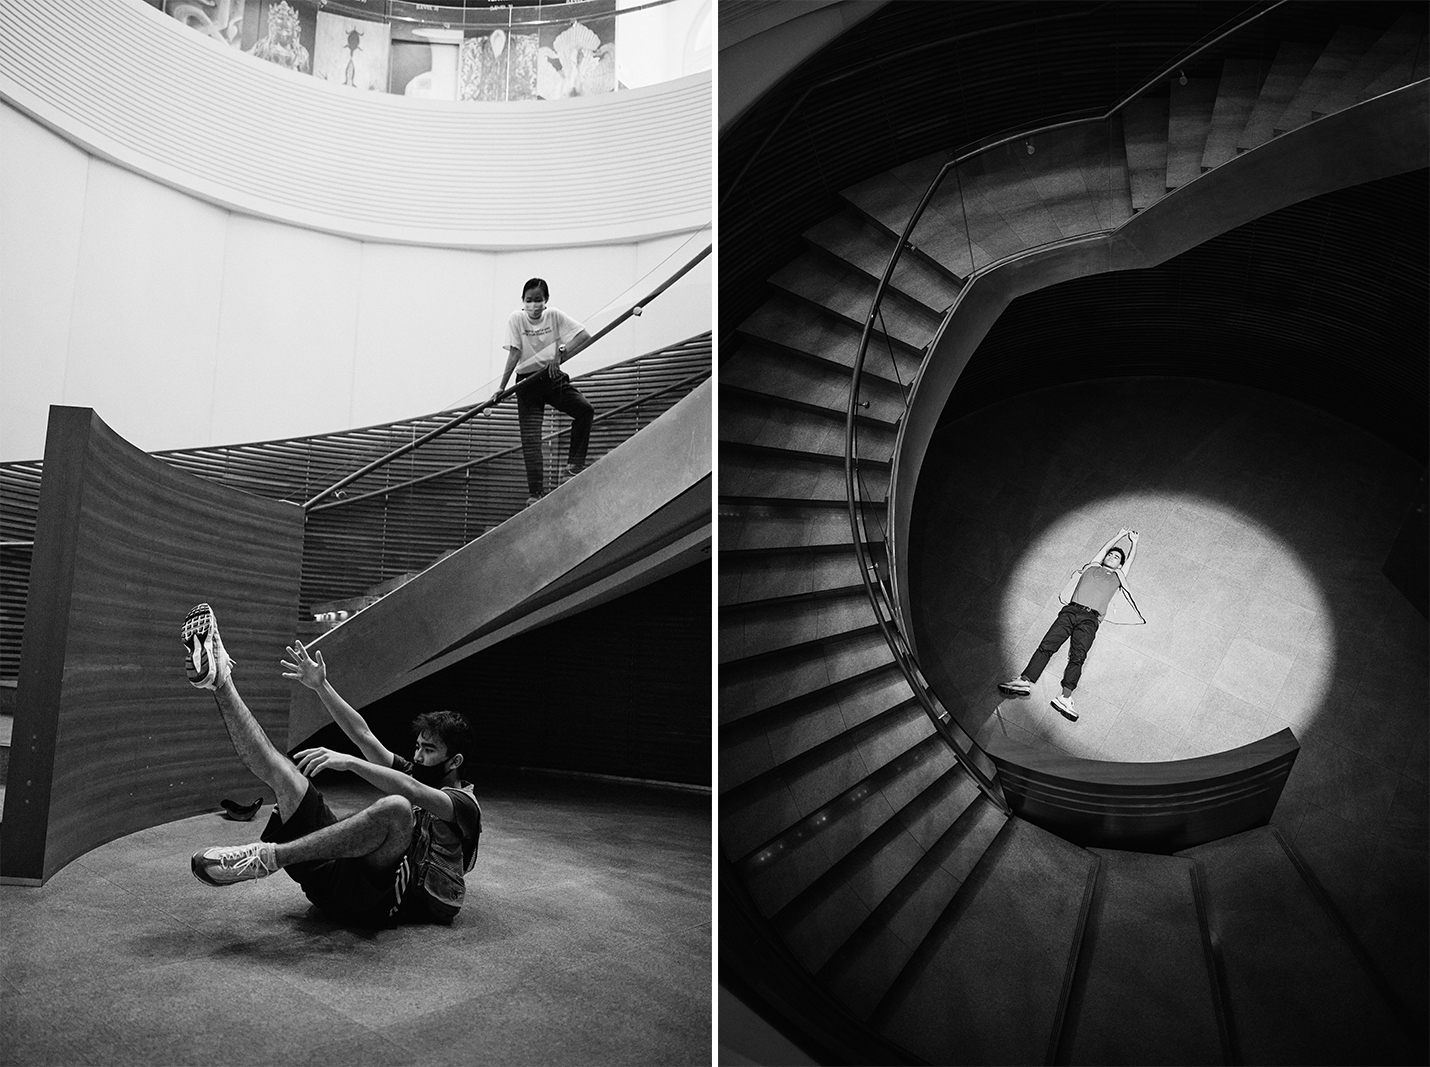 Diptych of choreographer Germaine Cheng rehearsing a dancer and of a bird's eye view of the dancer at the bottom of a stairwell